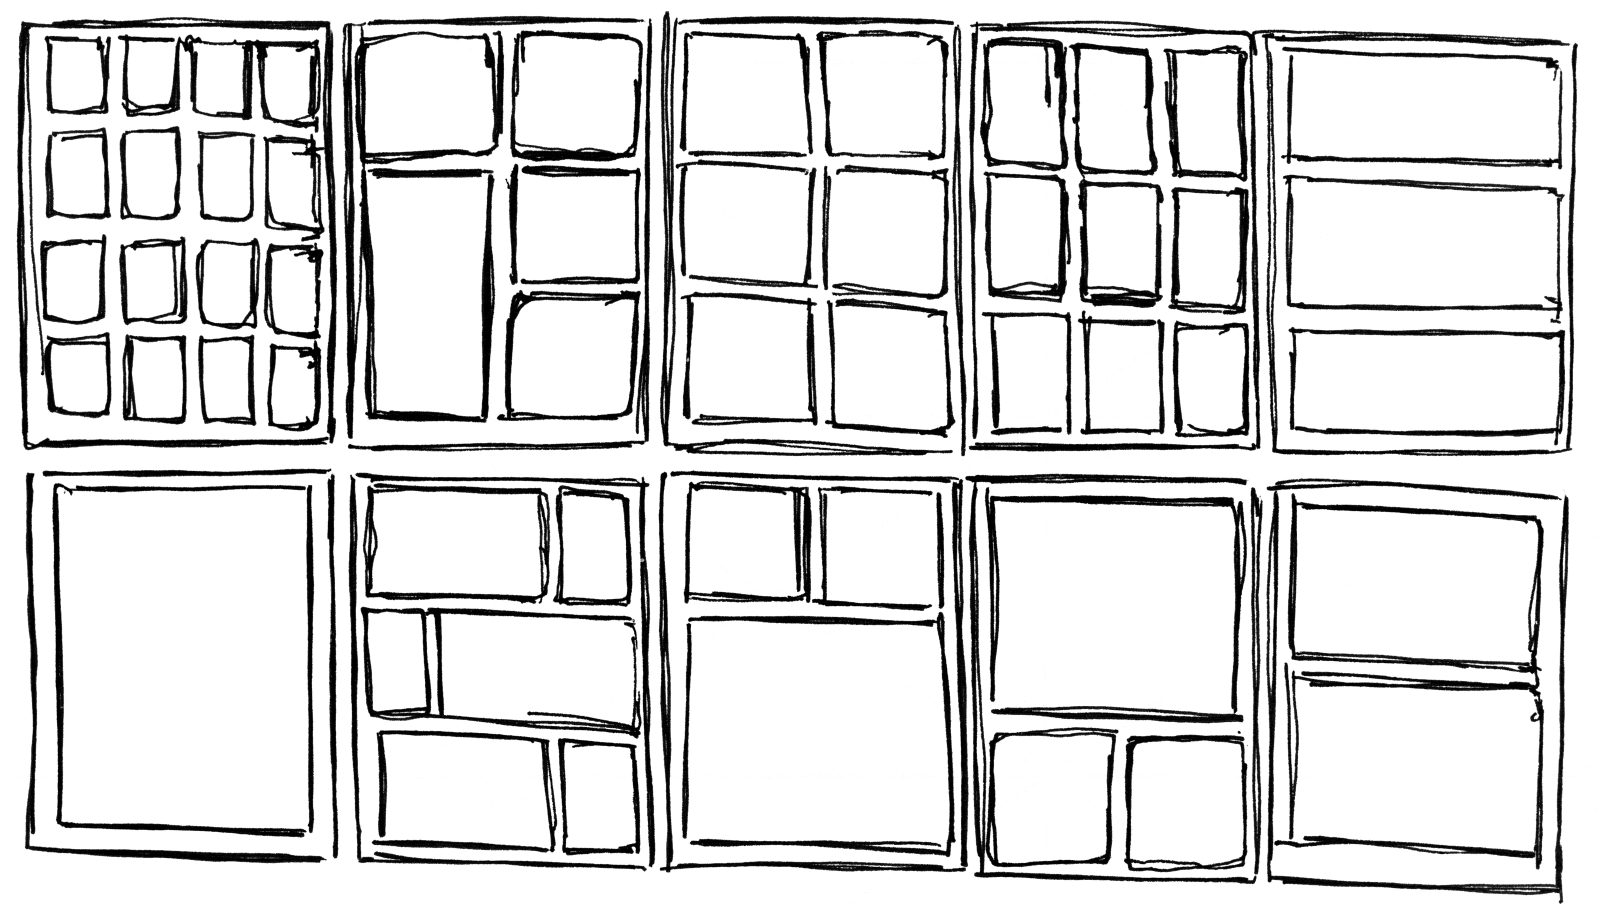 Examples of panels organized in, and aligned to, regular grids